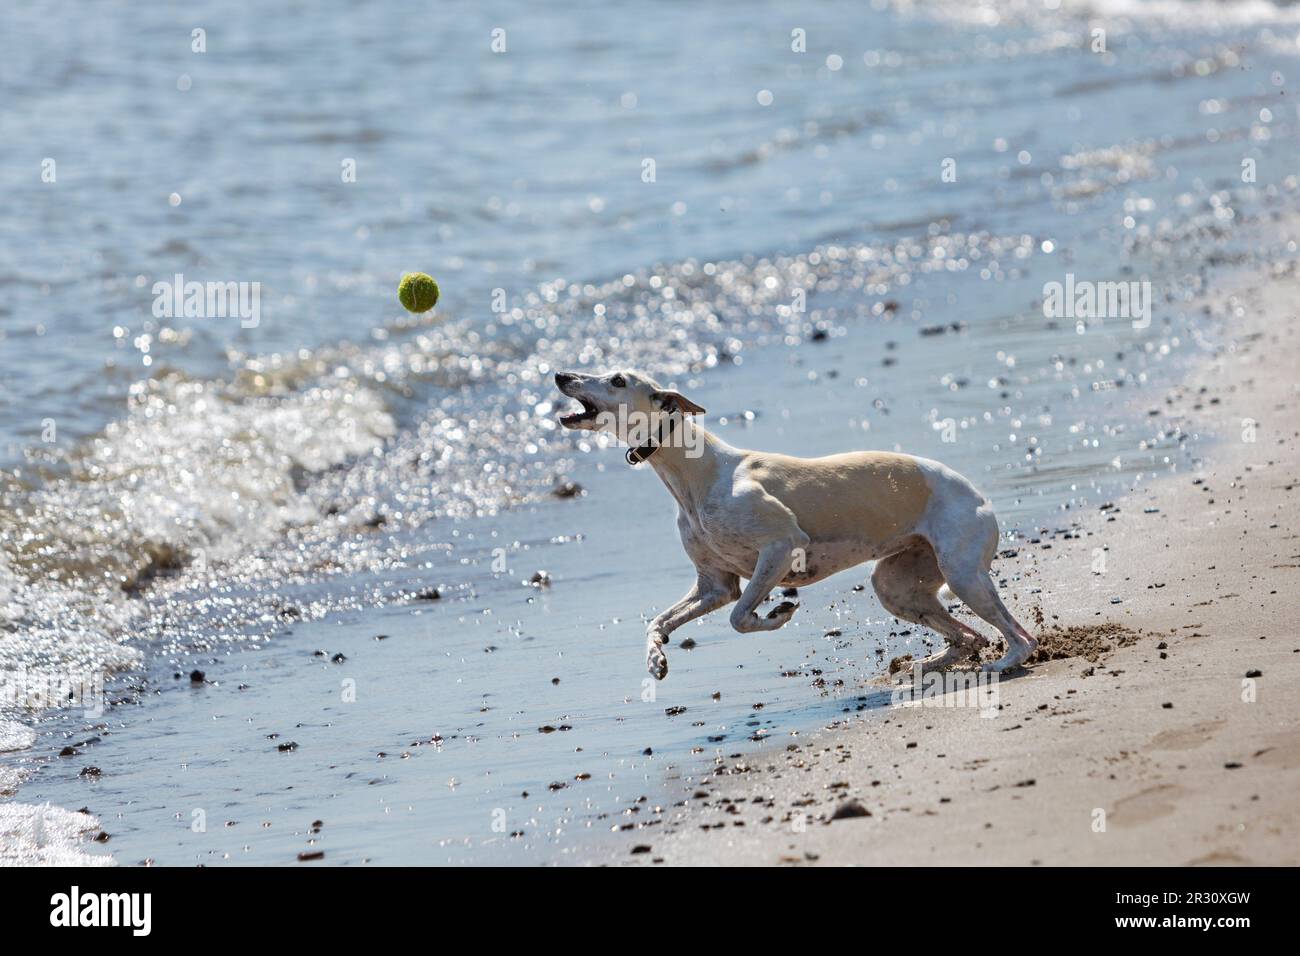 Whippet sighthound dog jumping to catch a tennisball at the beach shore Stock Photo